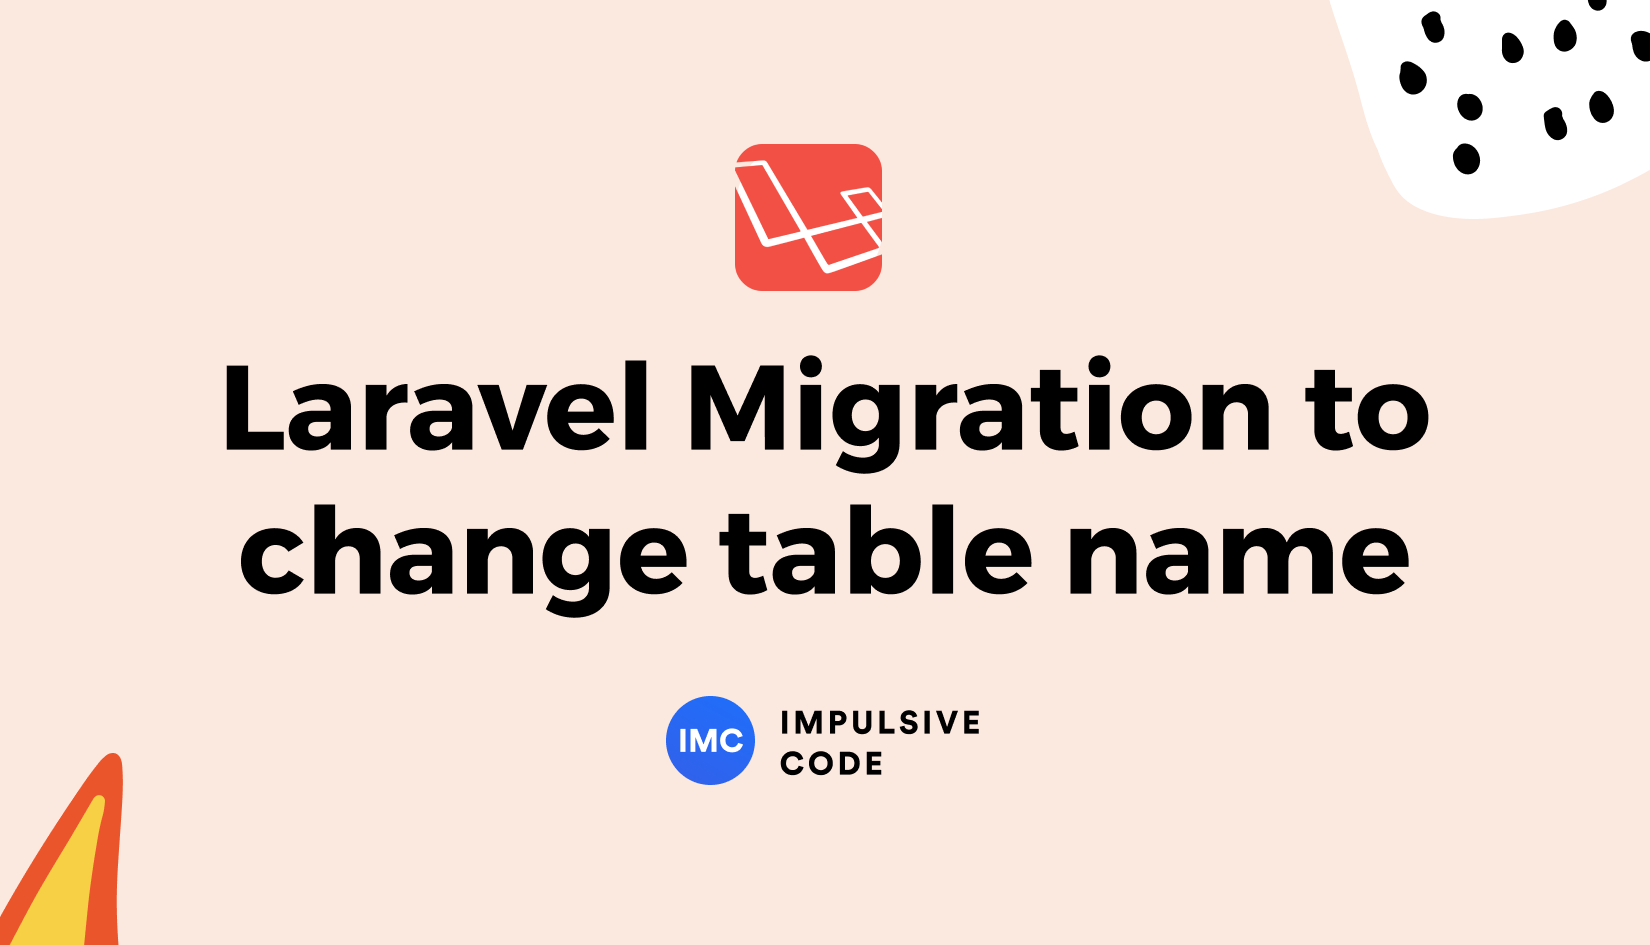 How to Change Table Name using Laravel Migration?